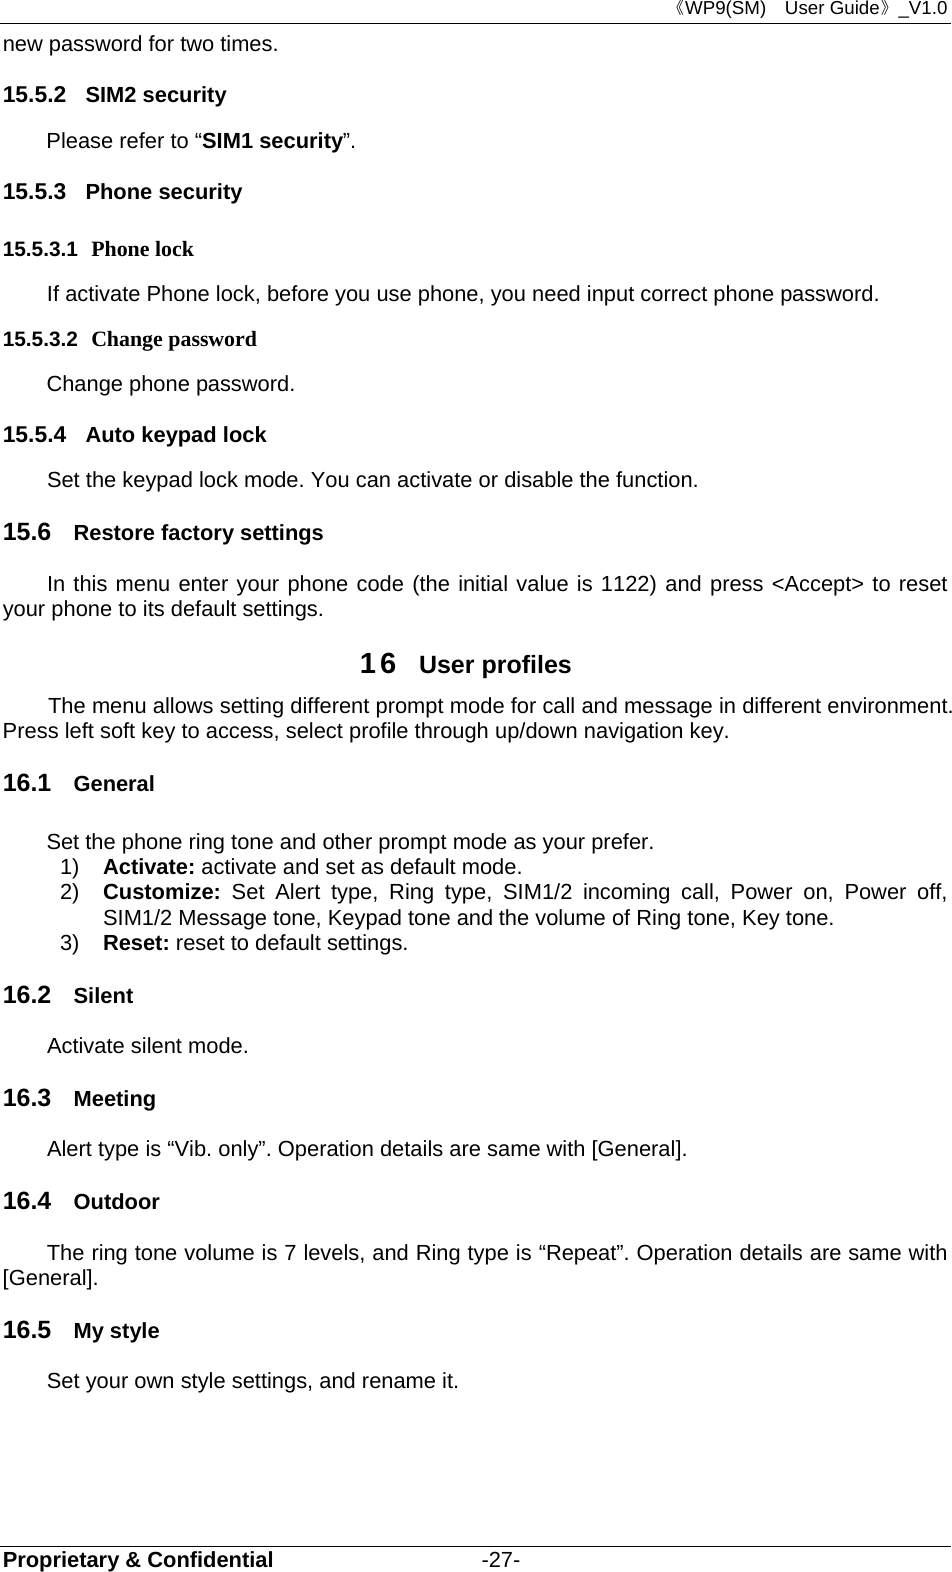 《WP9(SM)  User Guide》_V1.0 Proprietary &amp; Confidential                   -27- new password for two times. 15.5.2  SIM2 security Please refer to “SIM1 security”. 15.5.3  Phone security 15.5.3.1  Phone lock If activate Phone lock, before you use phone, you need input correct phone password. 15.5.3.2  Change password Change phone password. 15.5.4  Auto keypad lock   Set the keypad lock mode. You can activate or disable the function. 15.6  Restore factory settings In this menu enter your phone code (the initial value is 1122) and press &lt;Accept&gt; to reset your phone to its default settings. 16  User profiles The menu allows setting different prompt mode for call and message in different environment. Press left soft key to access, select profile through up/down navigation key.   16.1  General Set the phone ring tone and other prompt mode as your prefer.   1)  Activate: activate and set as default mode.   2)  Customize:  Set Alert type, Ring type, SIM1/2 incoming call, Power on, Power off, SIM1/2 Message tone, Keypad tone and the volume of Ring tone, Key tone. 3)  Reset: reset to default settings.   16.2  Silent Activate silent mode. 16.3  Meeting Alert type is “Vib. only”. Operation details are same with [General]. 16.4  Outdoor The ring tone volume is 7 levels, and Ring type is “Repeat”. Operation details are same with [General]. 16.5  My style Set your own style settings, and rename it.       